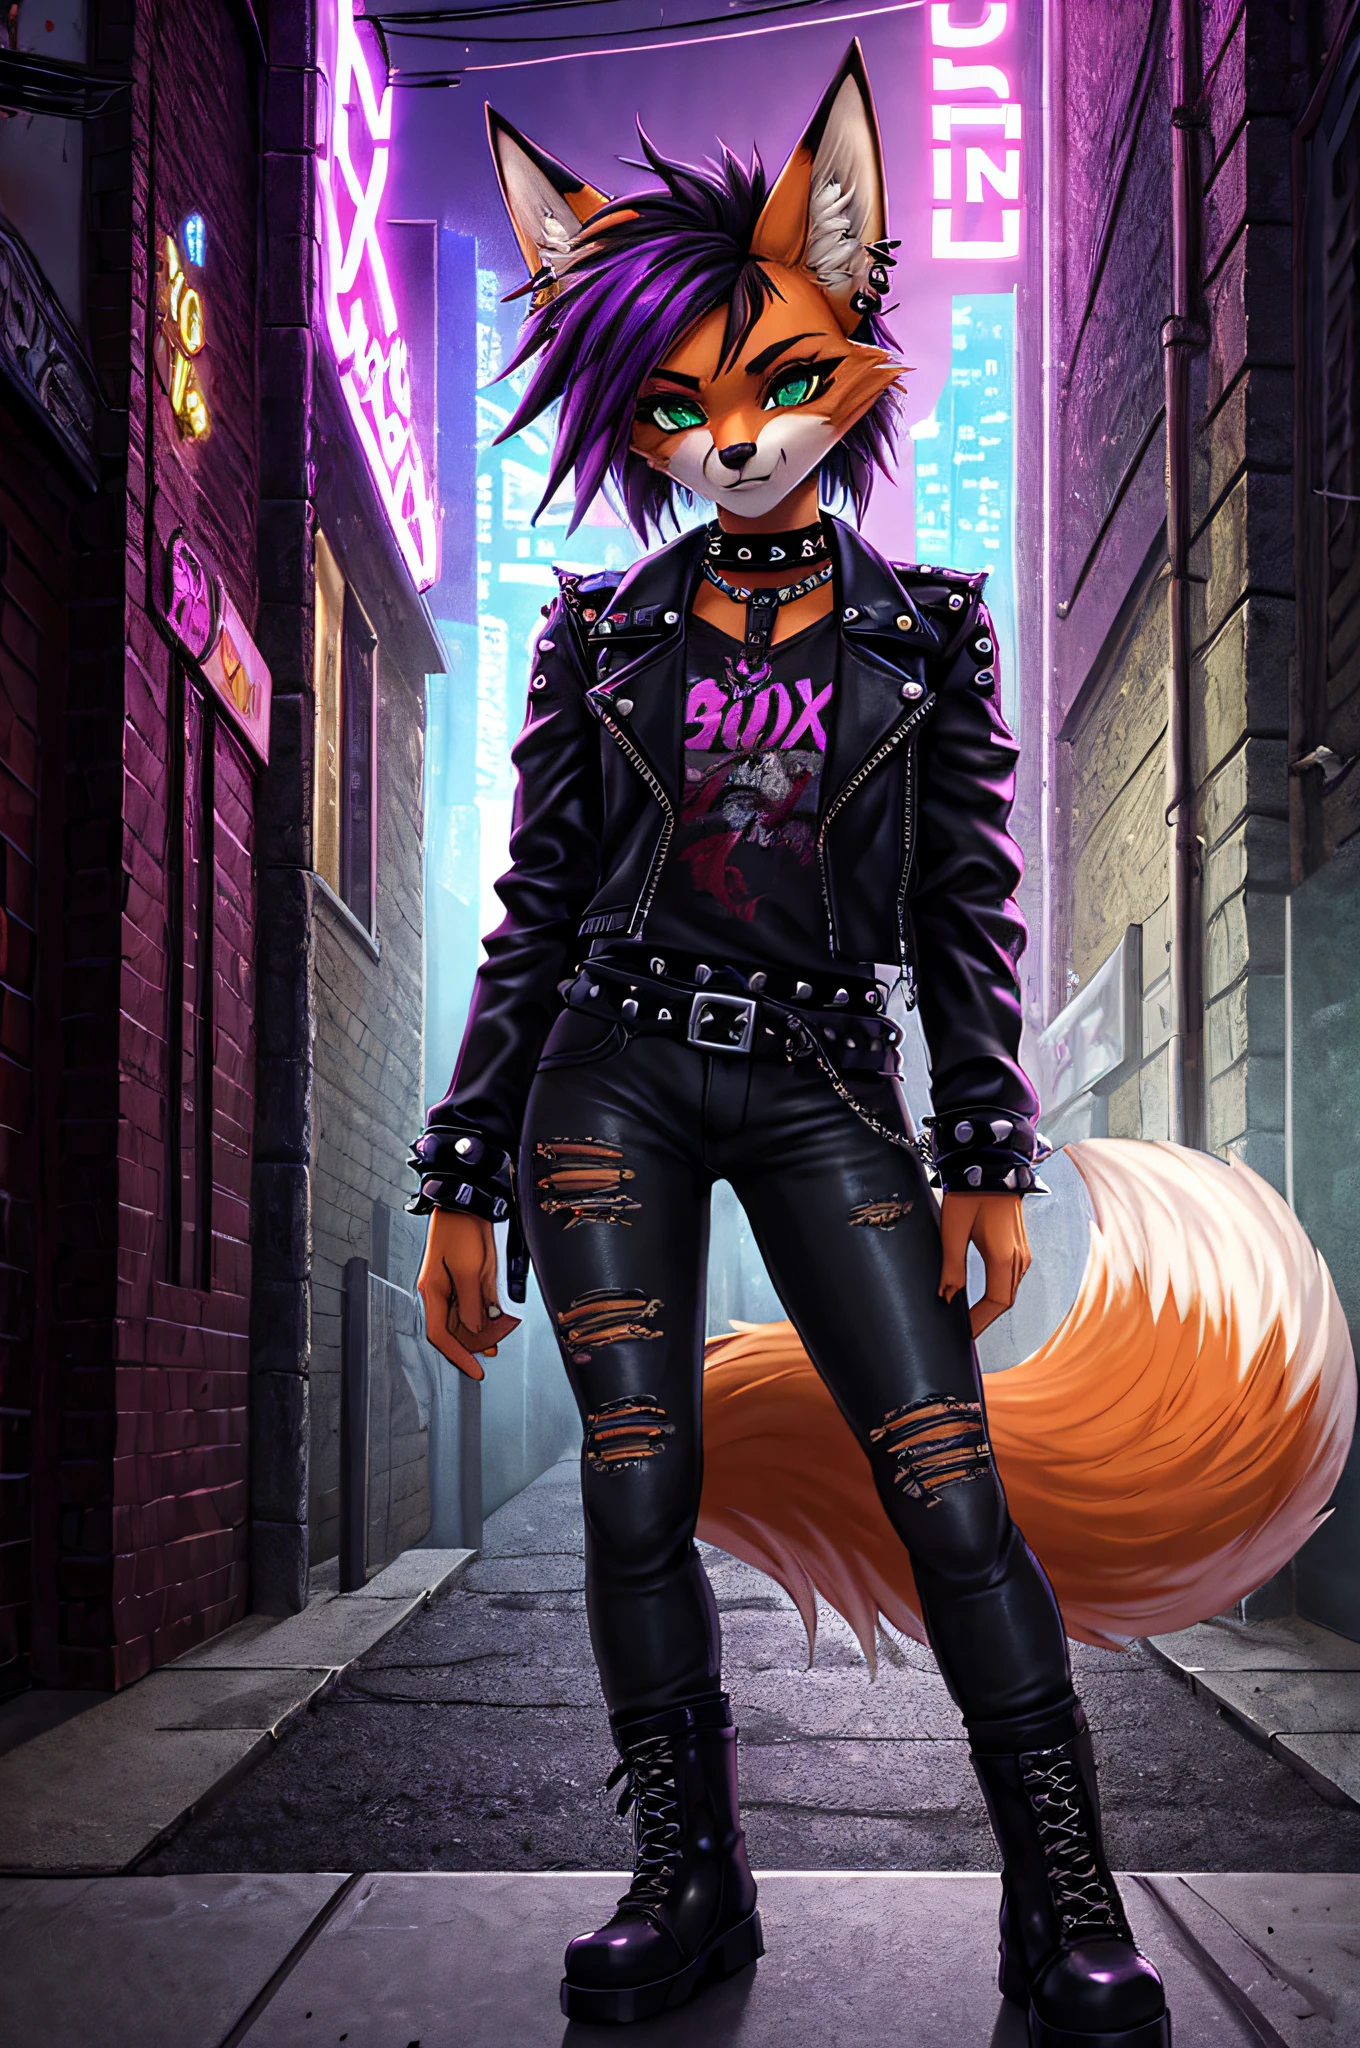 (ultra-realistic,highres,8k,best quality:1.2),vivid colors,beautiful detailed eyes,long eyelashes,fox girl,((fox snout,fox ears,orange fur,punk hair,goth style)),dark makeup,fierce expression,wild hair,earrings,leather jacket,distressed jeans,studded belt,combat boots,grungy background,edgy atmosphere,urban setting,nighttime lighting, purple highlights in hair, green eyes